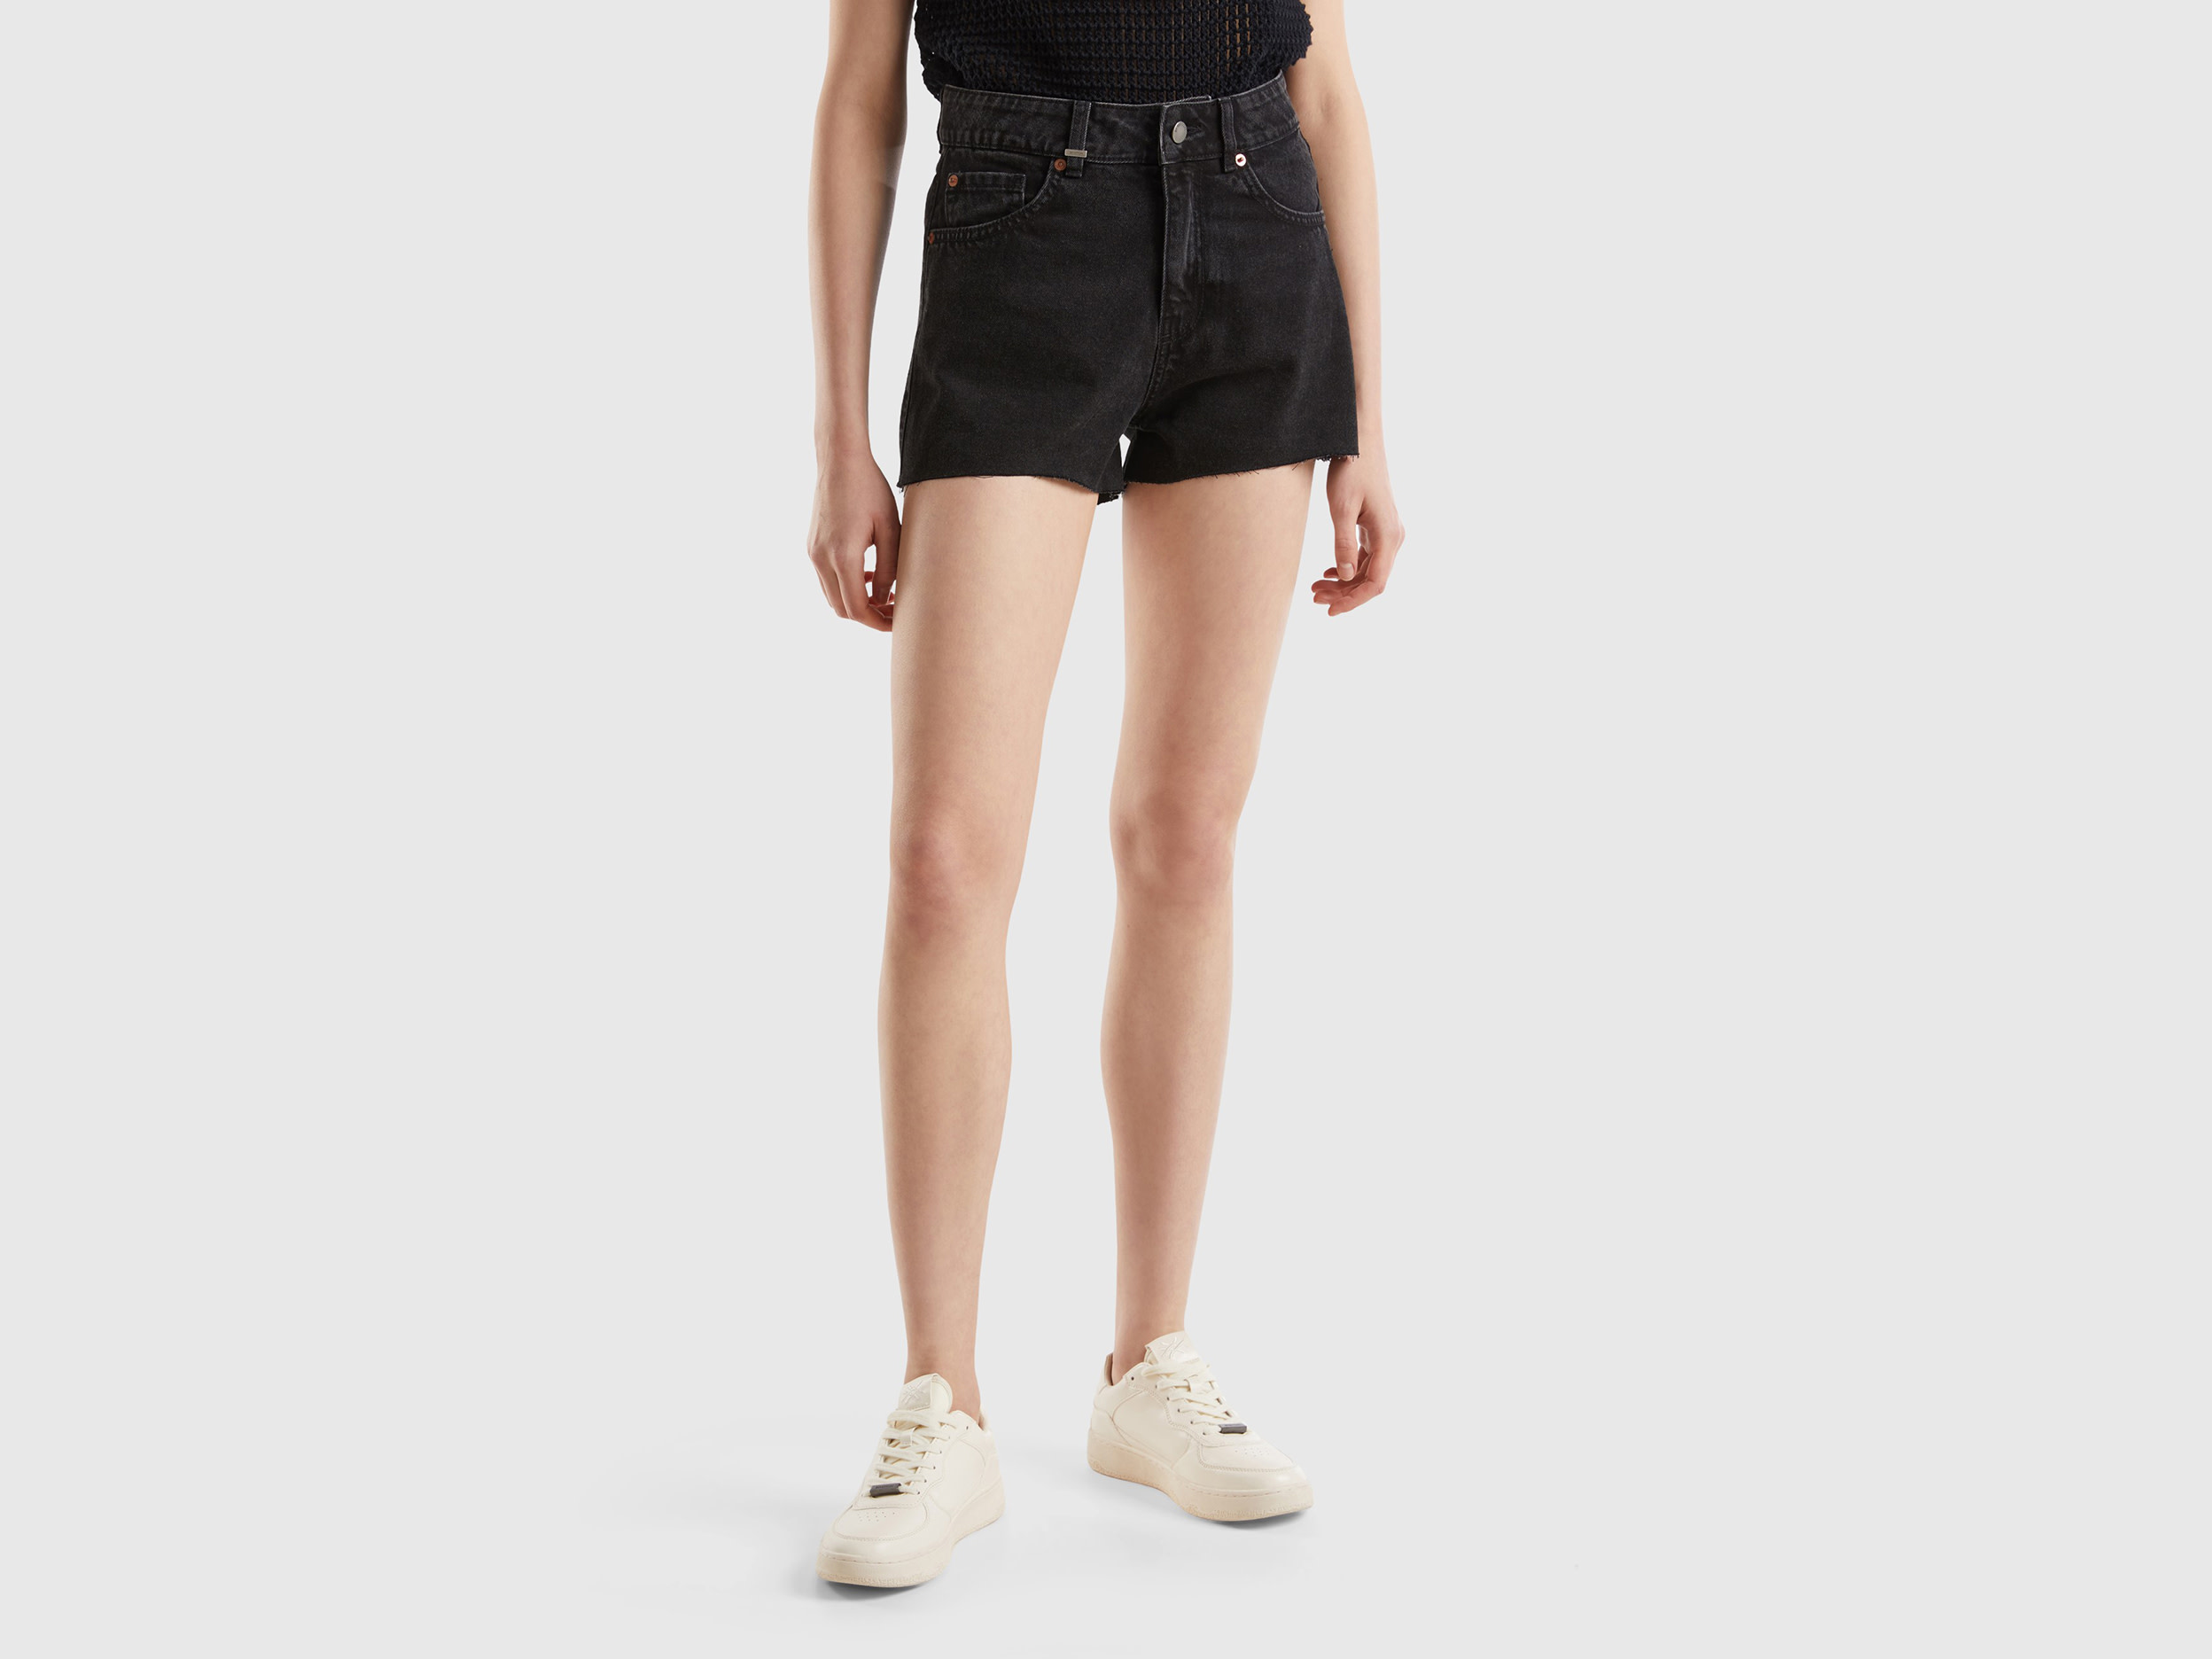 Image of Benetton, Frayed Shorts In Recycled Cotton Blend, size 25, Black, Women